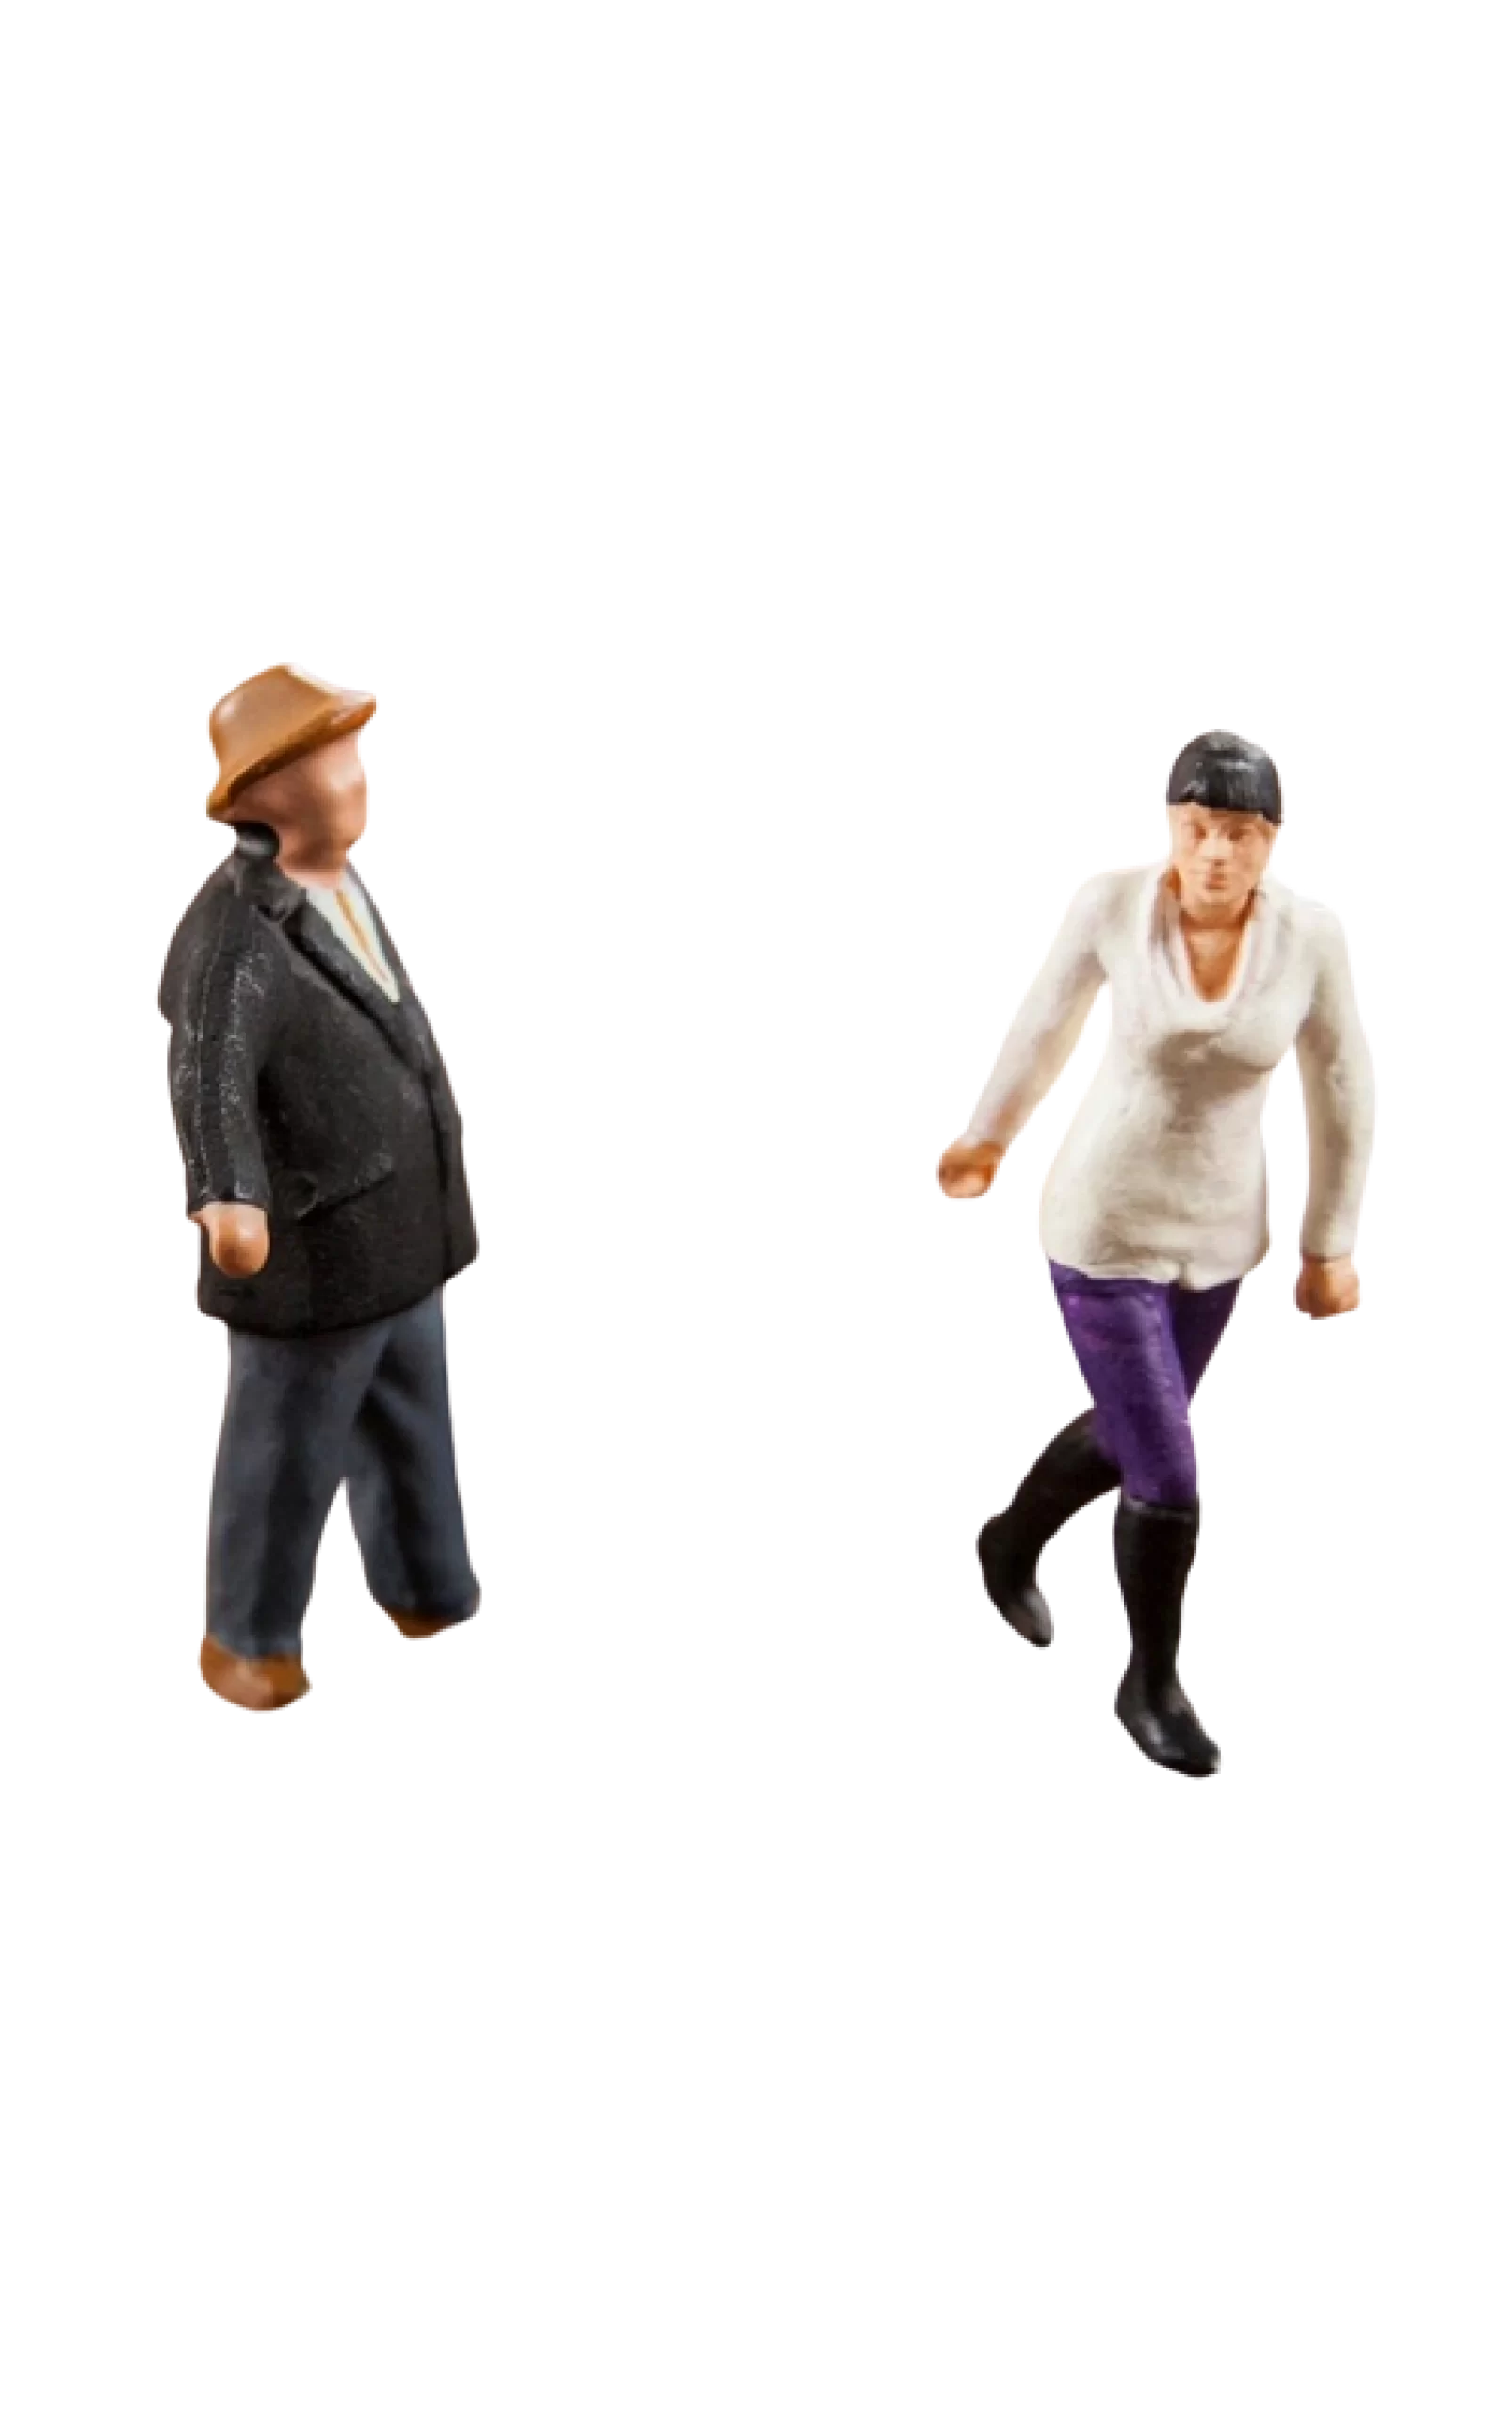 Two miniature figures depicting men, one walking and the other seemingly in a running pose, isolated on a black background.